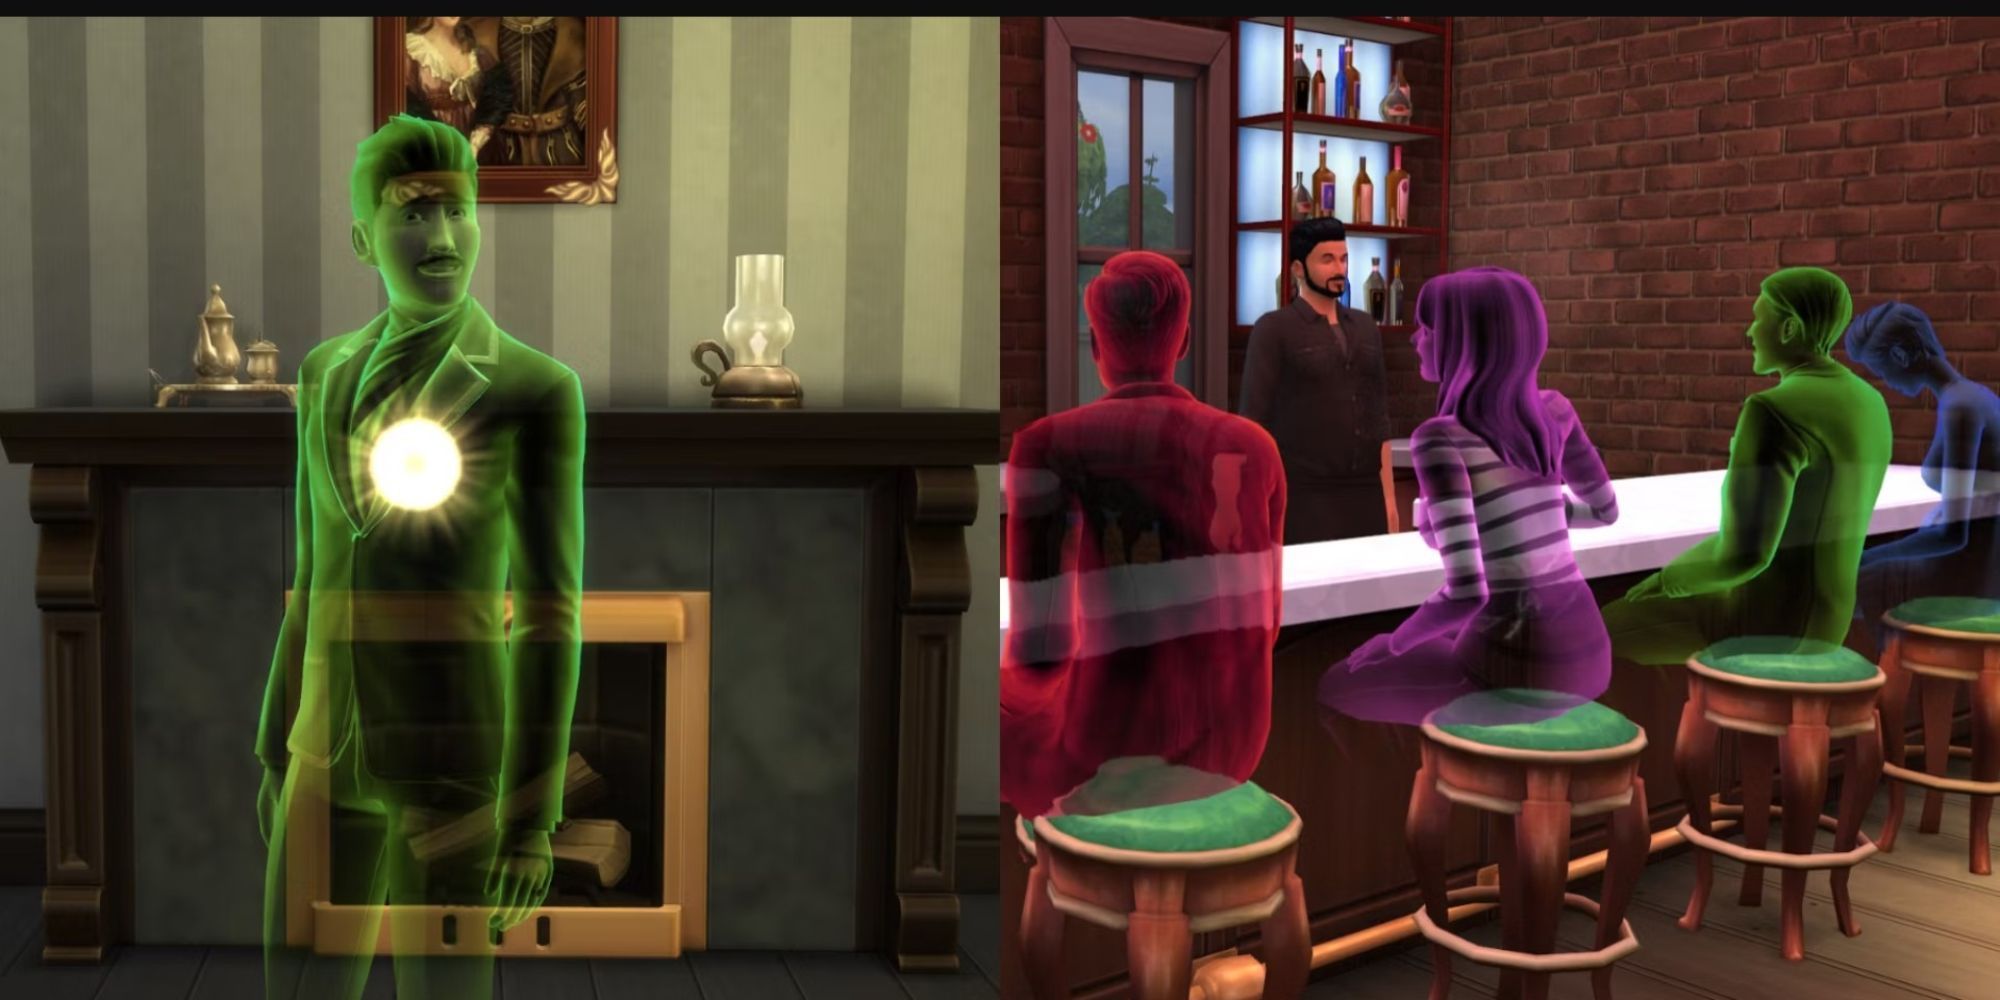 Ghosts at the bar in the Sims 4